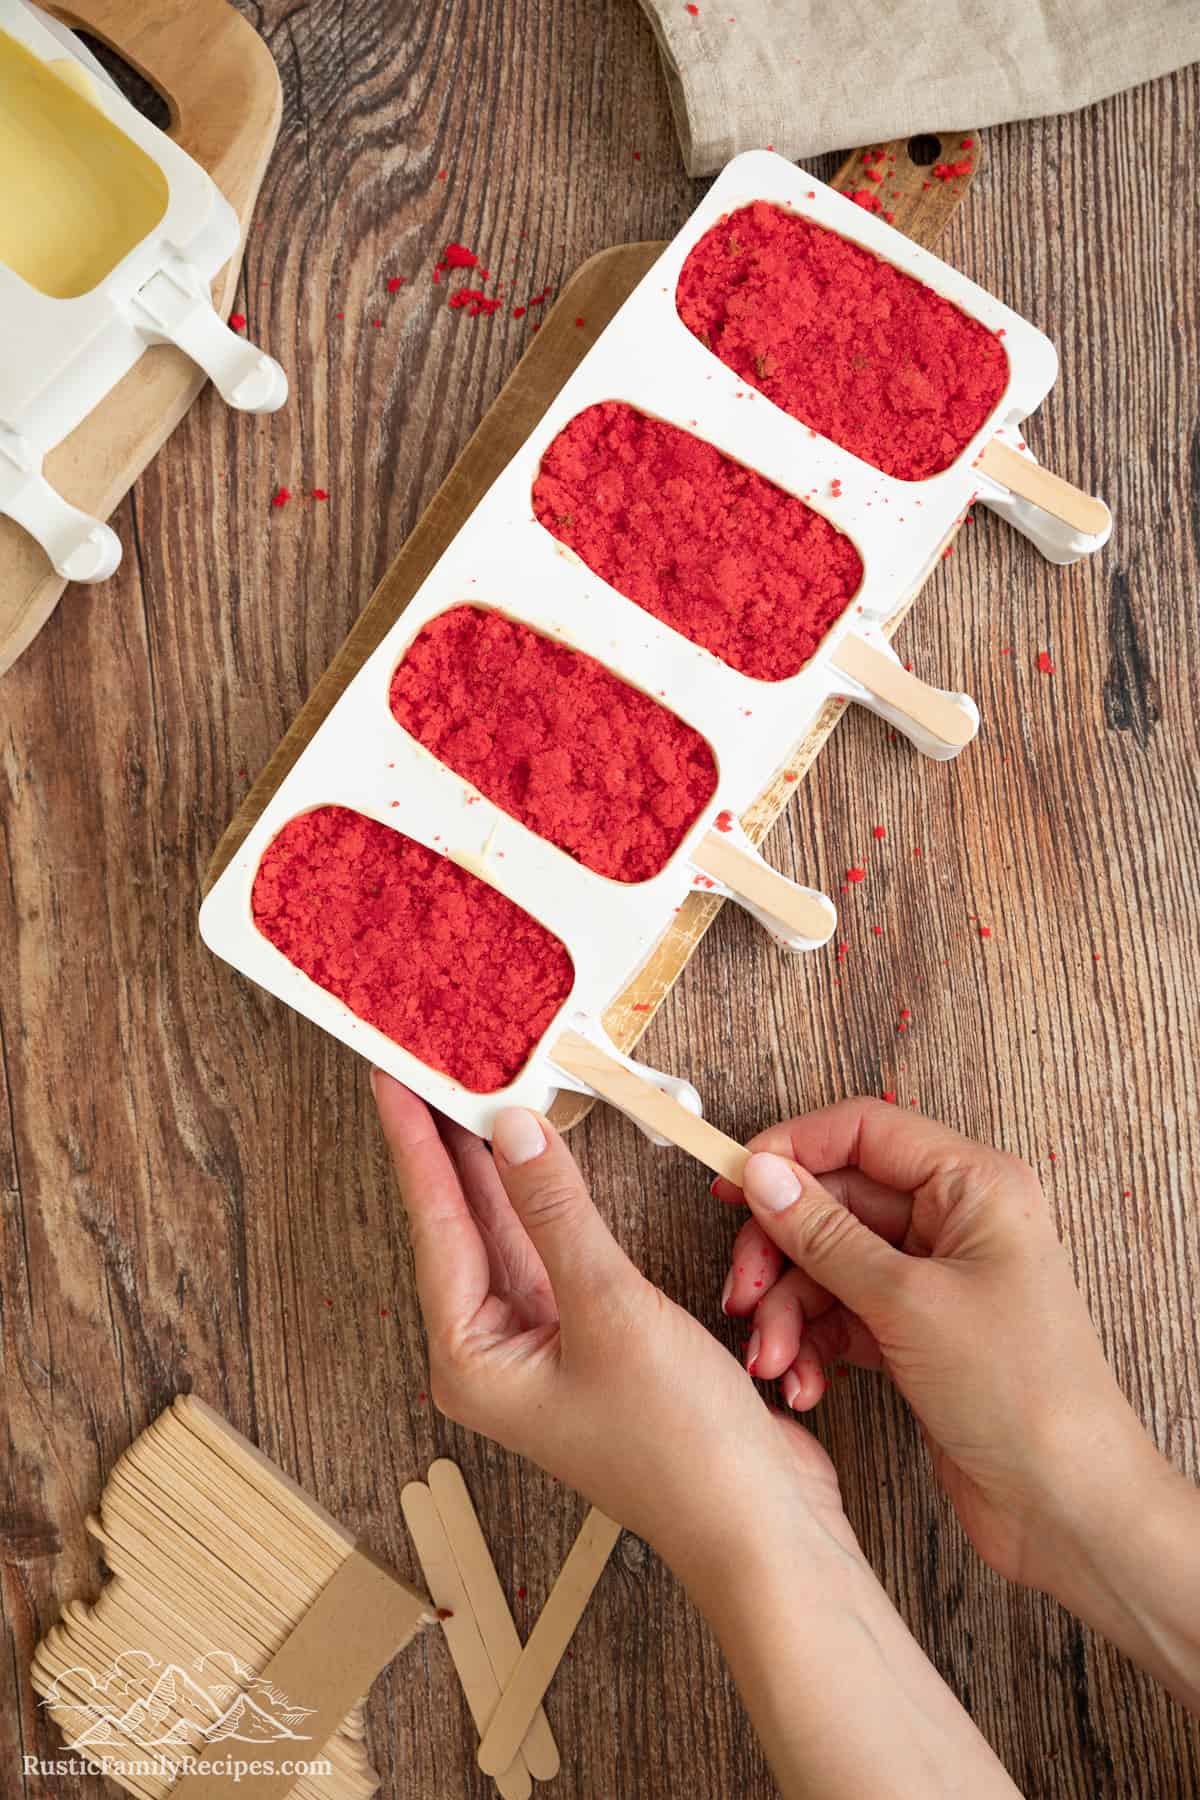 Popsicle sticks are inserted into the cakesicle molds.